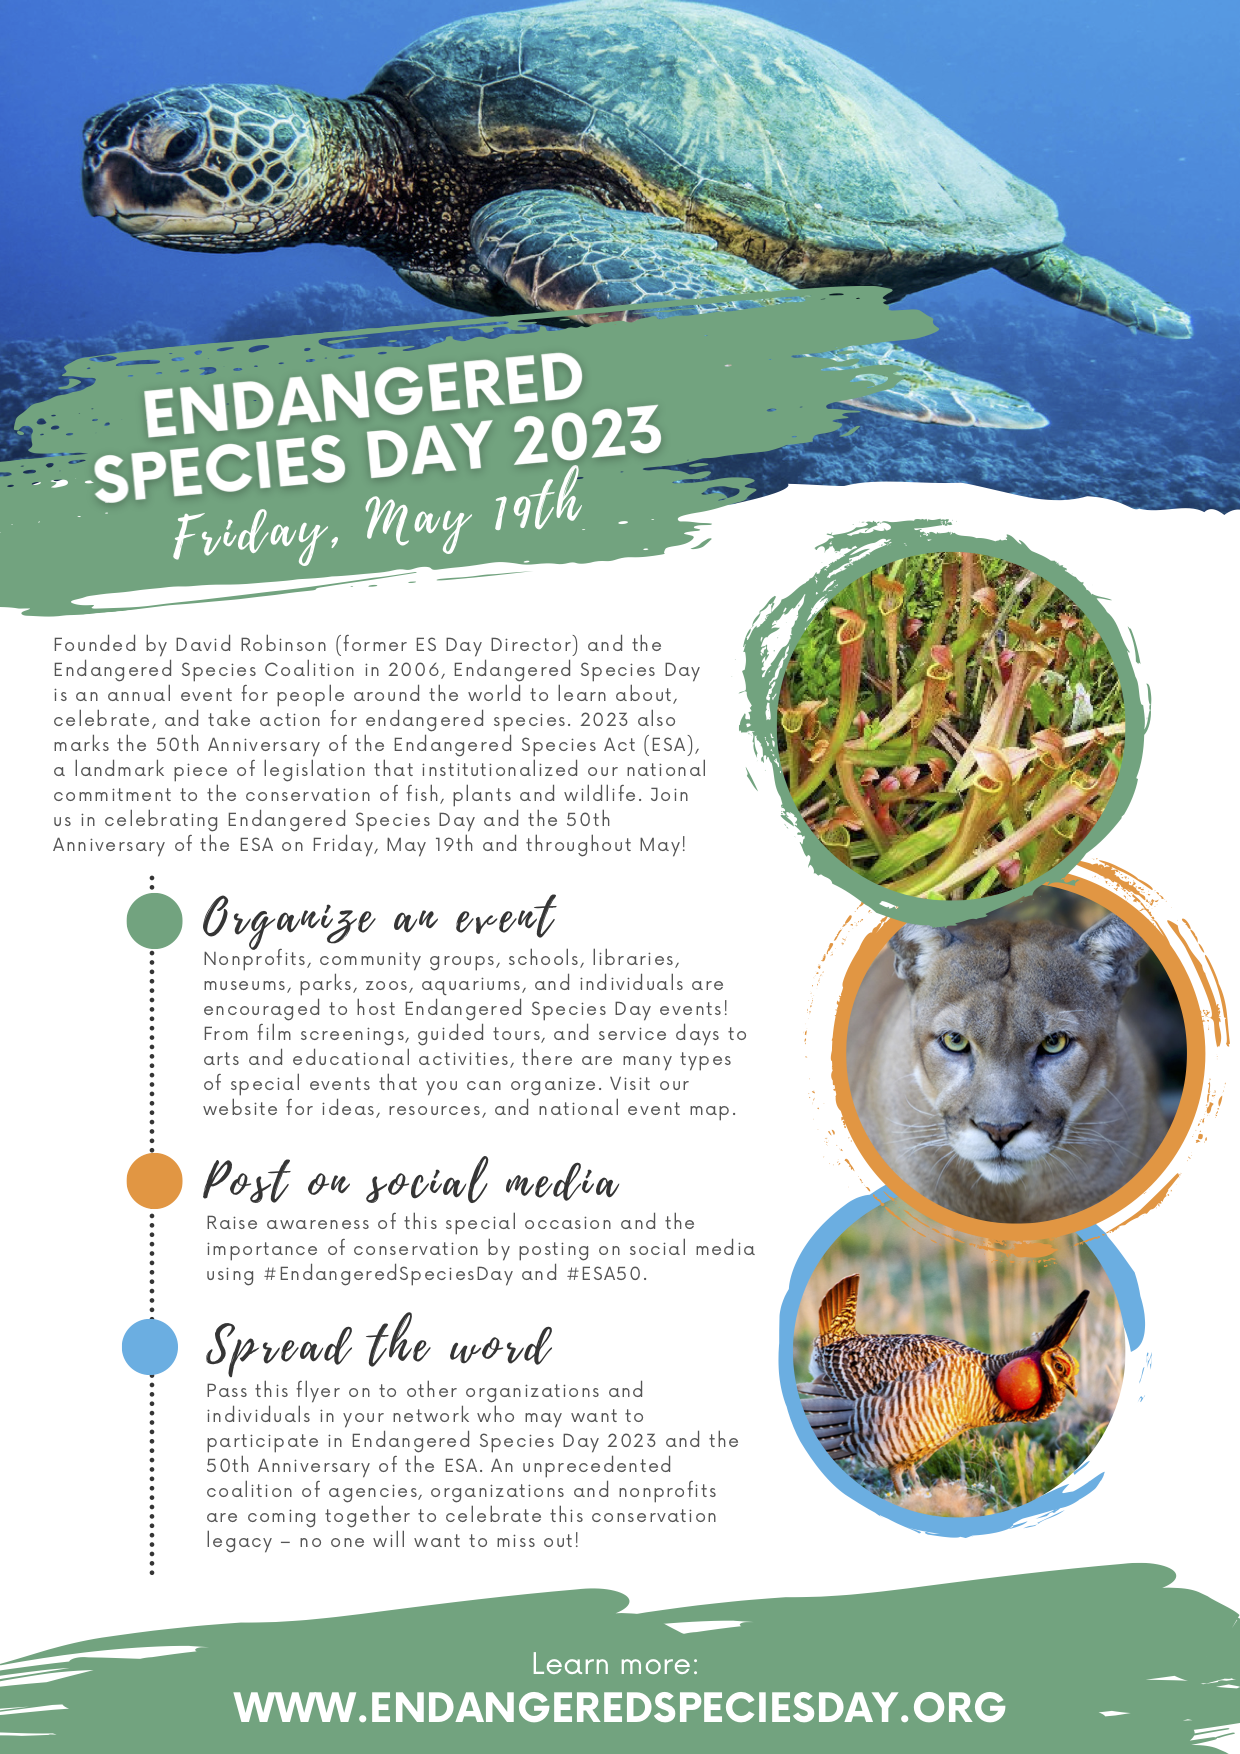 Founded by David Robinson (former ES Day Director) and the Endangered Species Coalition in 2006, Endangered Species Day is an annual event for people around the world to learn about, celebrate, and take action for endangered species. 2023 also marks the 50th Anniversary of the Endangered Species Act (ESA), a landmark piece of legislation that institutionalized our national commitment to the conservation of fish, plants and wildlife. Join us in celebrating Endangered Species Day and the 50th Anniversary of the ESA on Friday, May 19th and throughout May!
Organize an event
Nonprofits, community groups, schools, libraries, museums, parks, zoos, aquariums, and individuals are encouraged to host Endangered Species Day events! From film screenings, guided tours, and service days to arts and educational activities, there are many types of special events that you can organize. Visit our website for ideas, resources, and national event map.
Post on social media
Raise awareness of this special occasion and the importance of conservation by posting on social media using #EndangeredSpeciesDay and #ESA50.
Spread the word
Pass this flyer on to other organizations and individuals in your network who may want to participate in Endangered Species Day 2023 and the 50th Anniversary of the ESA. An unprecedented coalition of agencies, organizations and nonprofits are coming together to celebrate this conservation legacy – no one will want to miss out!
Learn more:
WWW.ENDANGEREDSPECIESDAY.ORG